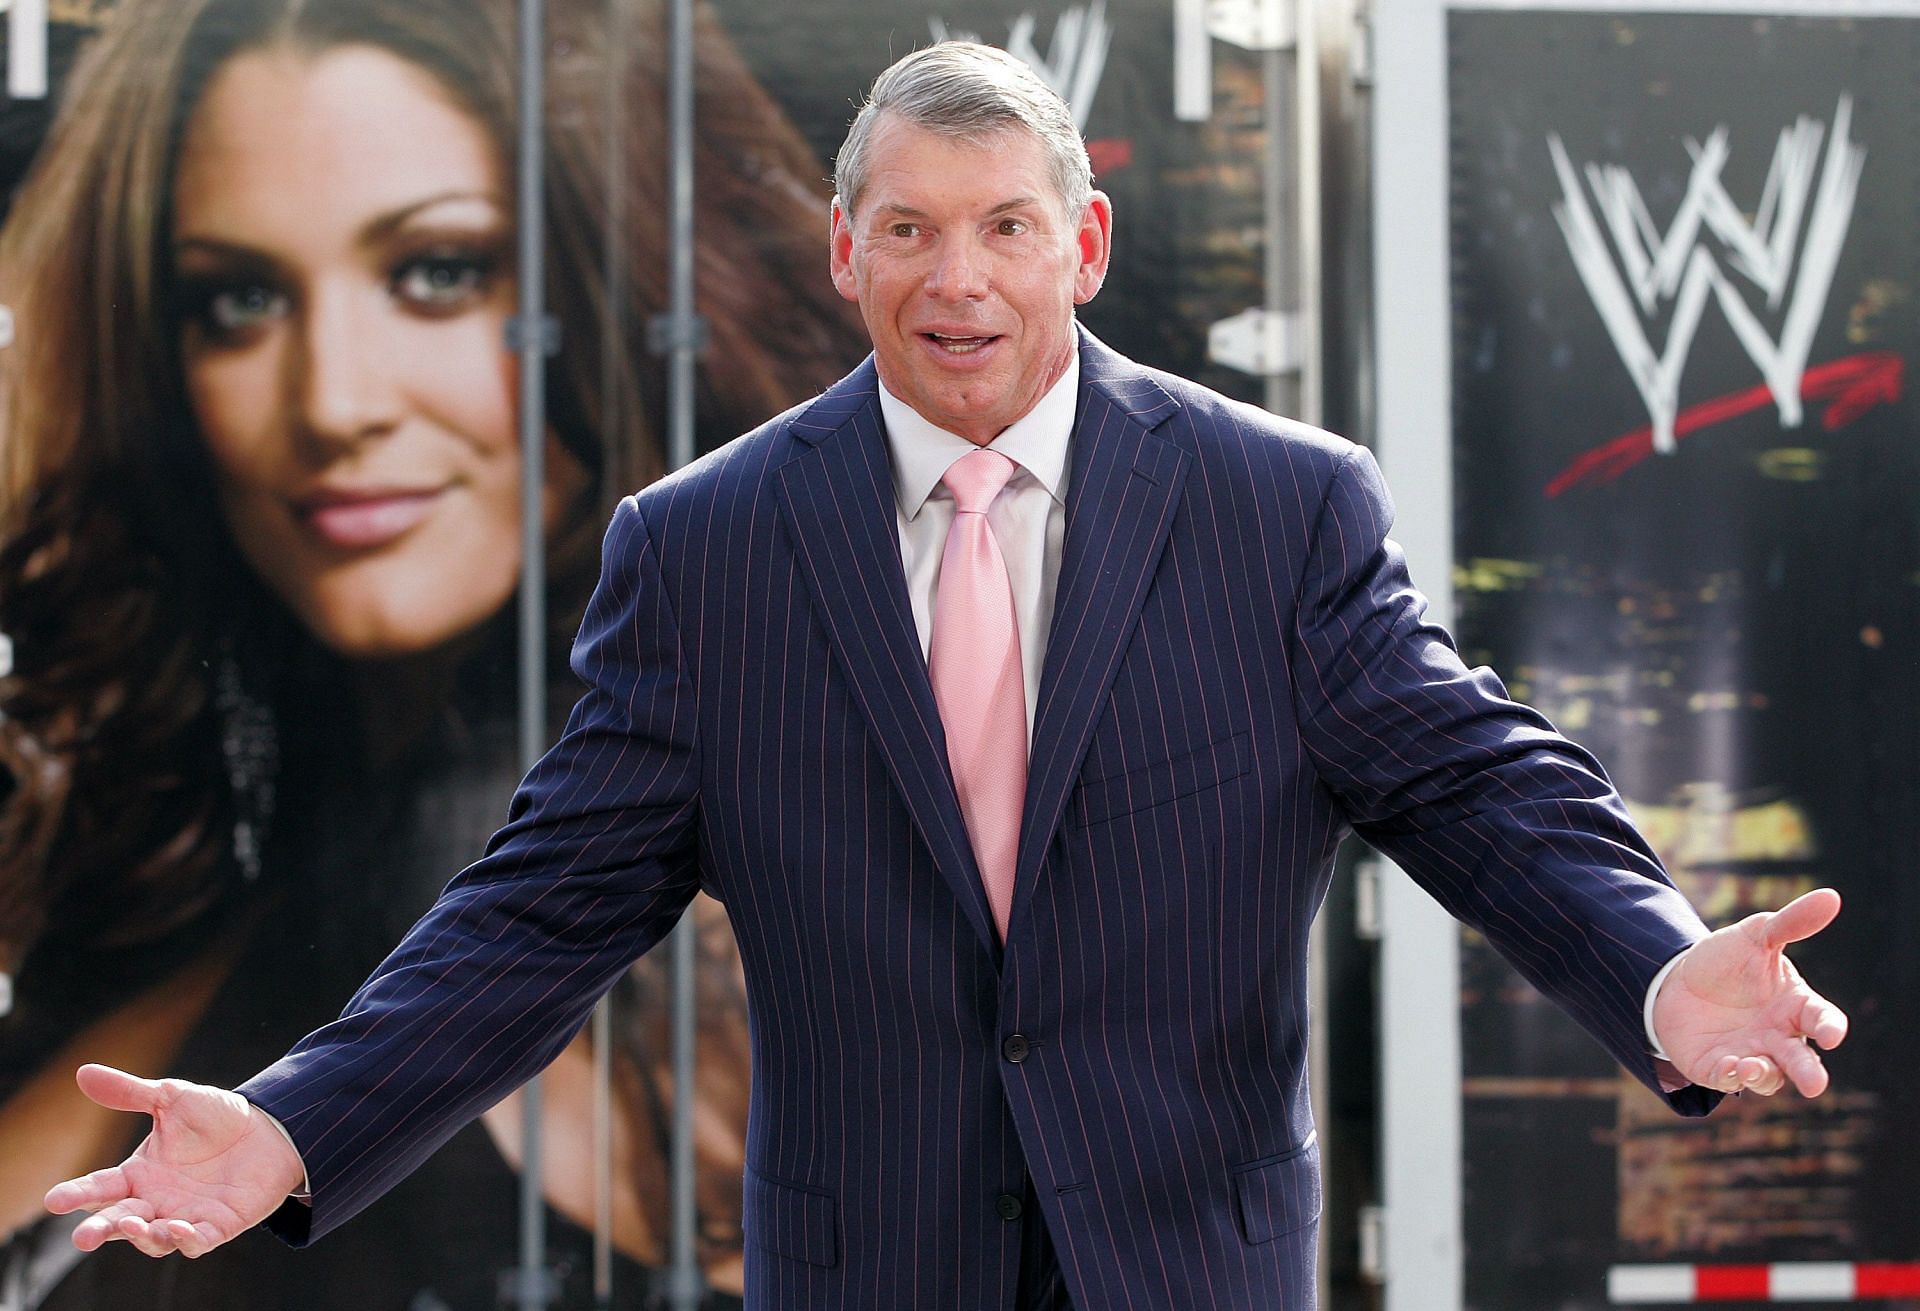 There have been rumors that Vince McMahon may merge both brands soon